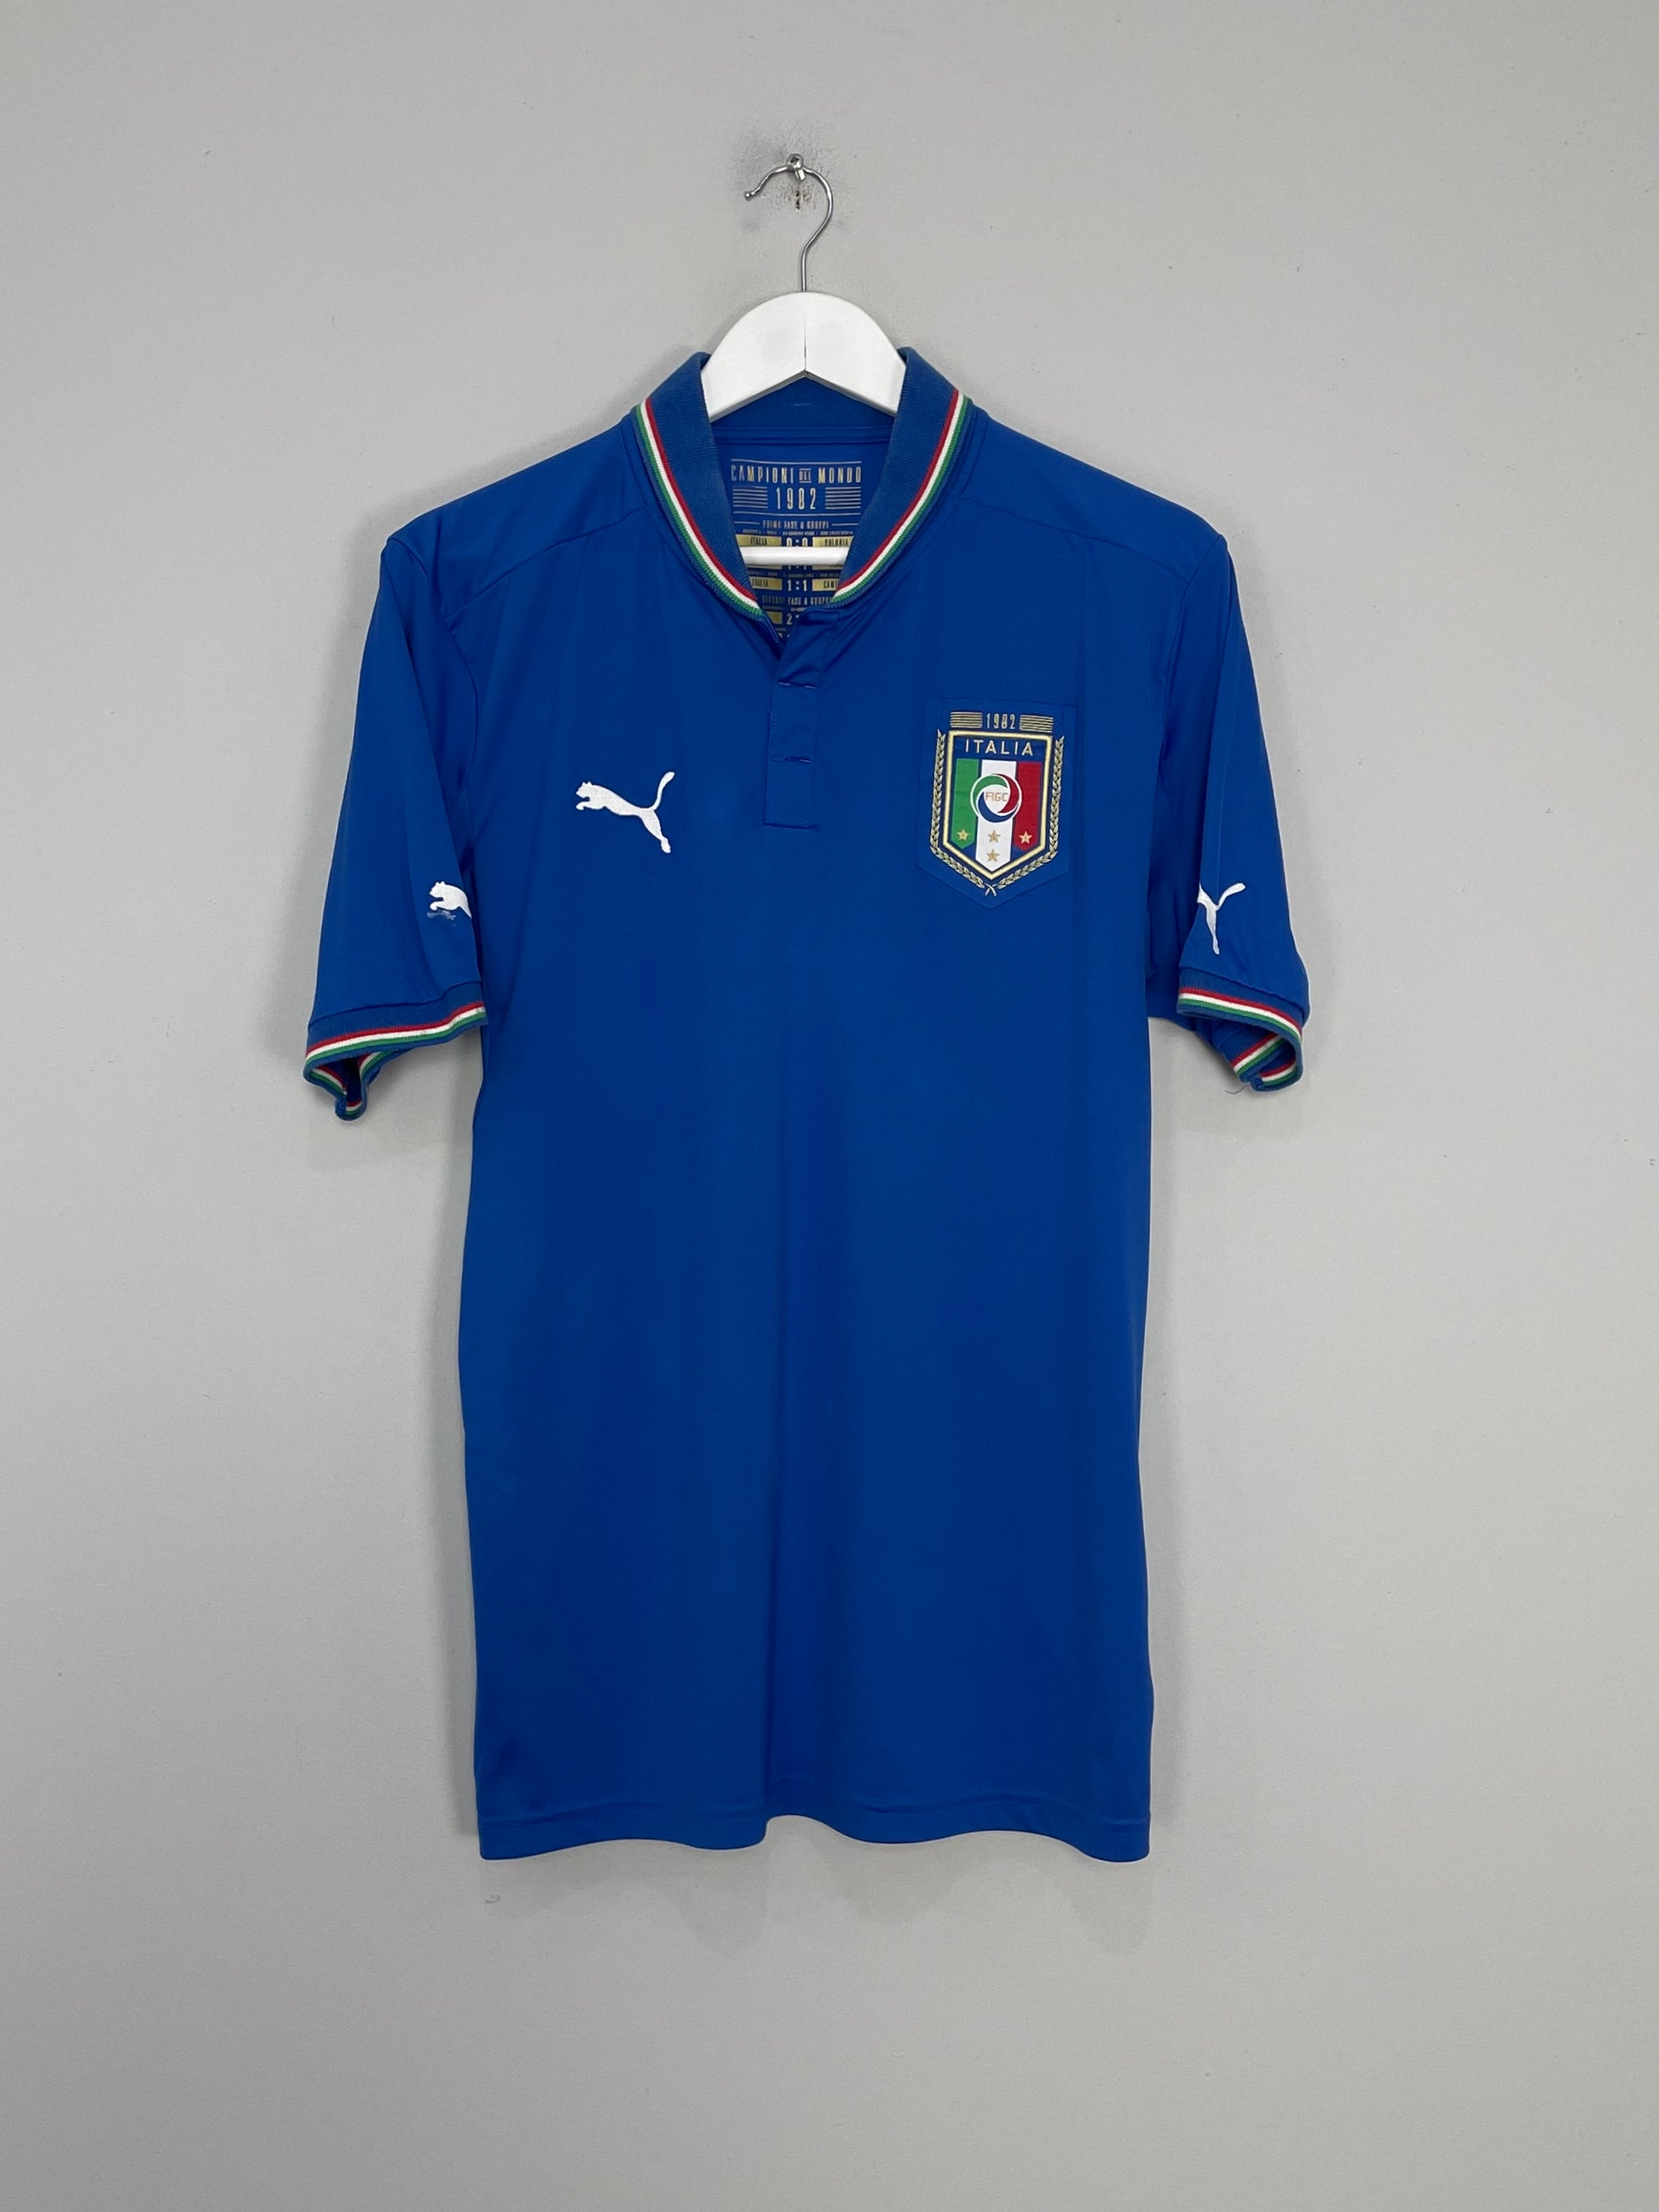 Image of the Italy shirt from the 2012/13 season